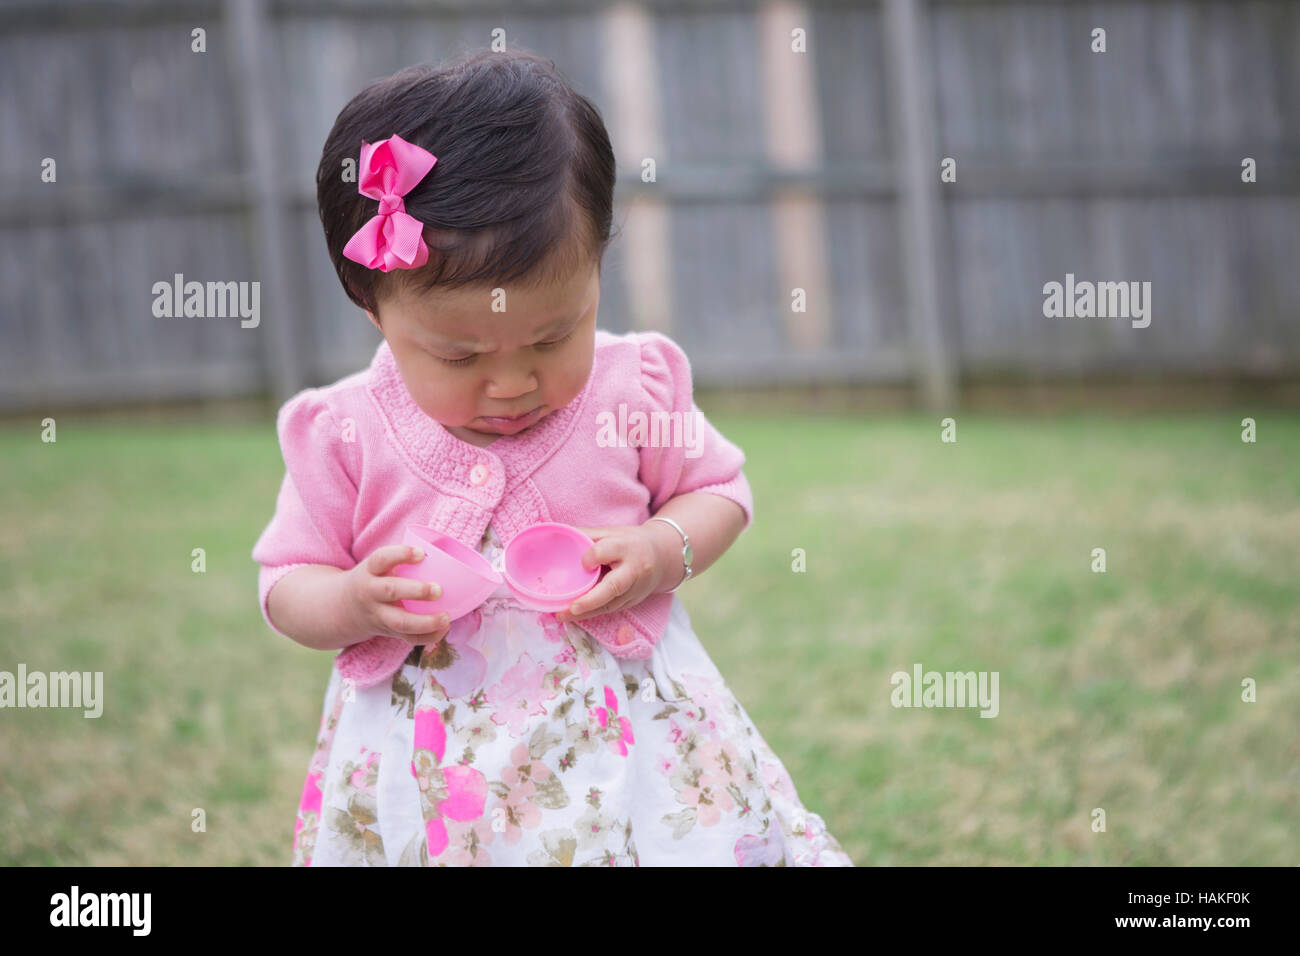 Toddler Girl Frowning as she Opens an Empty Easter Egg Stock Photo